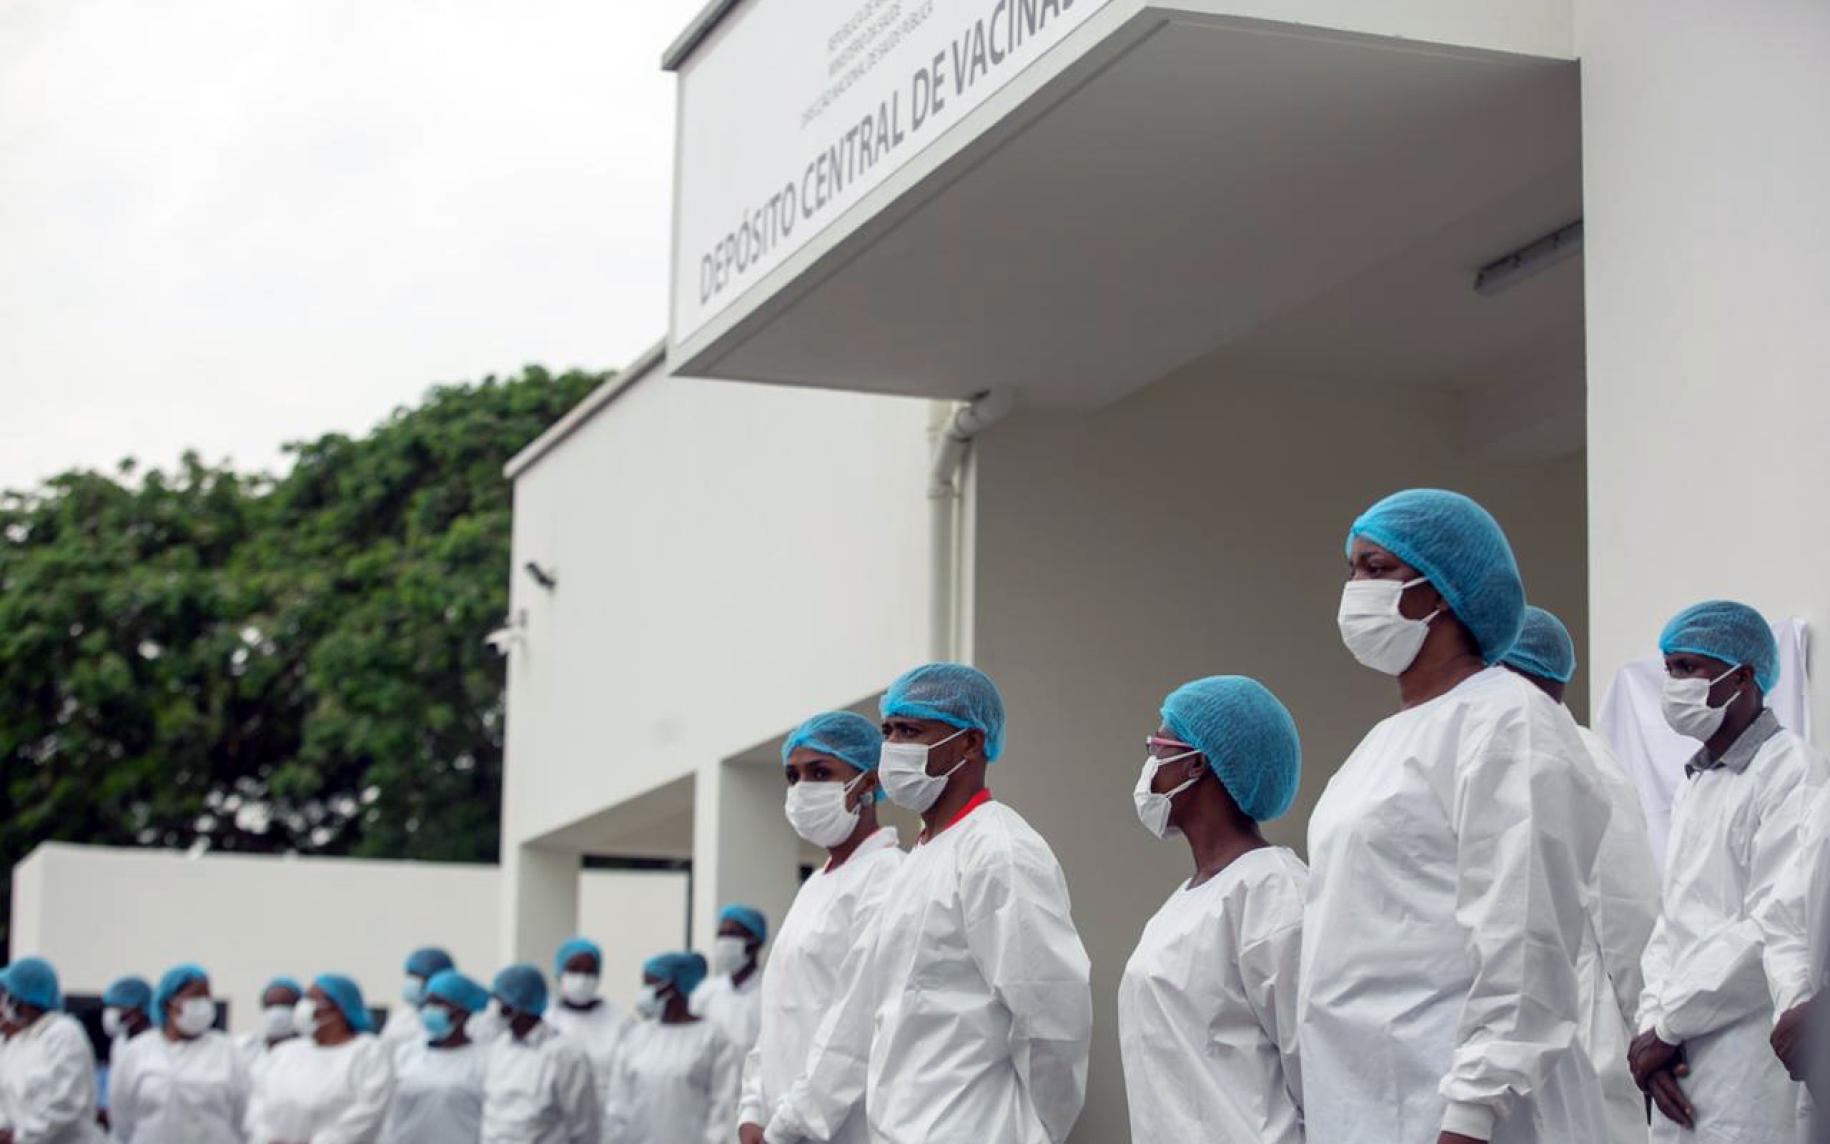 Health professionals line up outside the vaccination facility to administer Angola's first COVID-19 vaccines.